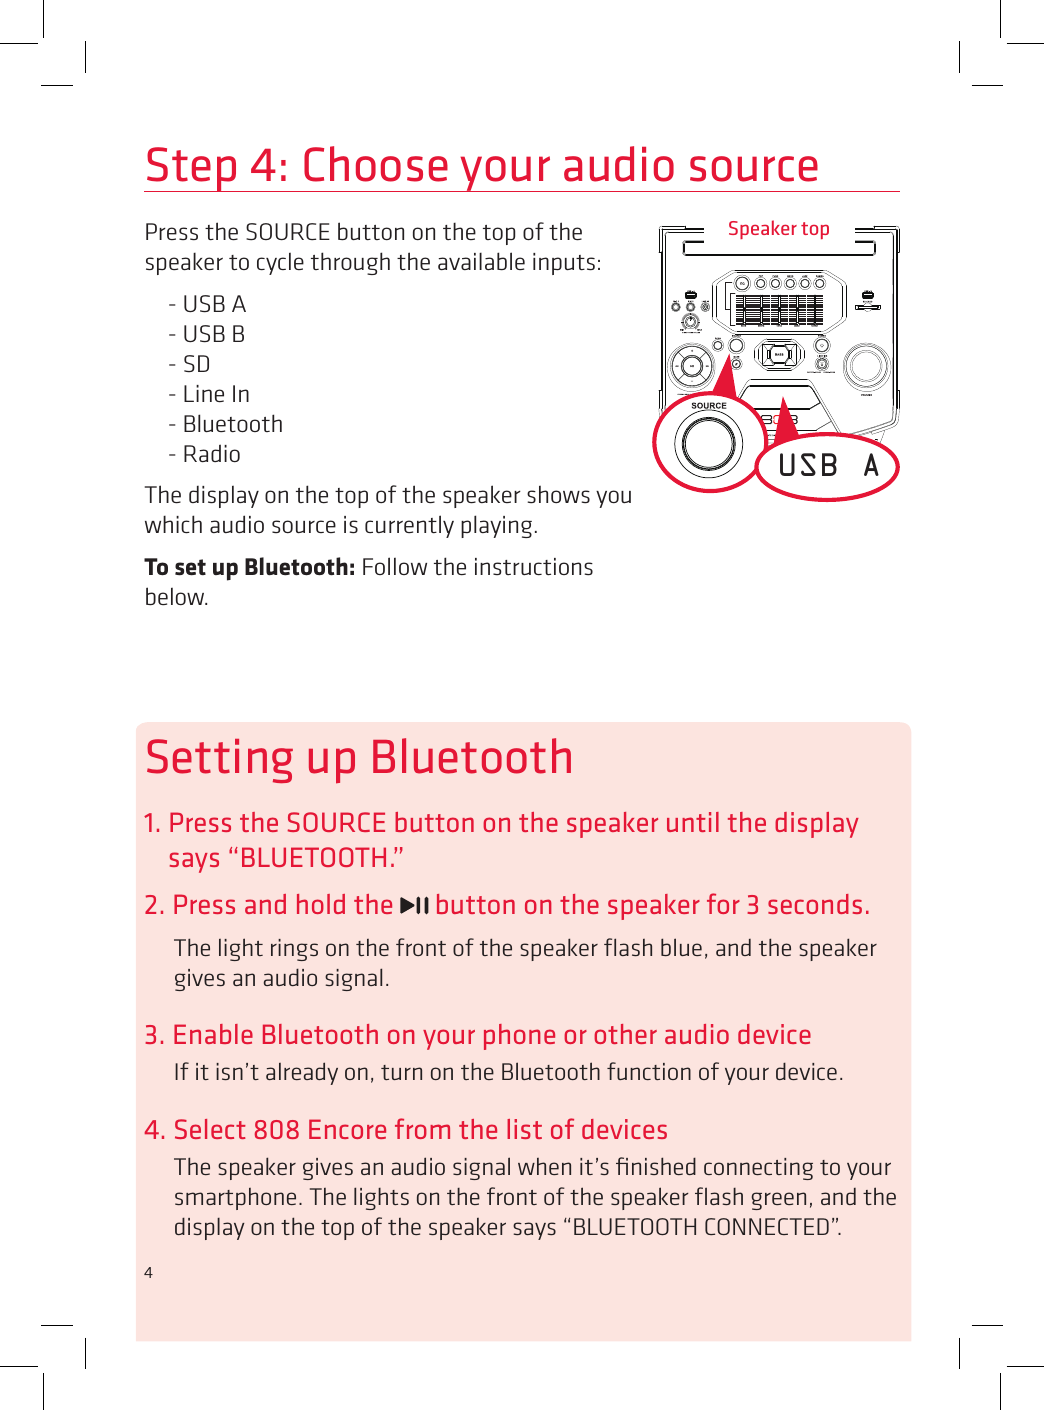 4Step 4: Choose your audio sourceSpeaker topPress the SOURCE button on the top of the speaker to cycle through the available inputs:- USB A - USB B - SD - Line In - Bluetooth - RadioThe display on the top of the speaker shows you which audio source is currently playing. To set up Bluetooth: Follow the instructions below.USB ASetting up Bluetooth1. Press the SOURCE button on the speaker until the display says “BLUETOOTH.”2. Press and hold the   button on the speaker for 3 seconds.The light rings on the front of the speaker ﬂash blue, and the speaker gives an audio signal.3. Enable Bluetooth on your phone or other audio deviceIf it isn’t already on, turn on the Bluetooth function of your device.4. Select 808 Encore from the list of devicesThe speaker gives an audio signal when it’s ﬁnished connecting to your smartphone. The lights on the front of the speaker ﬂash green, and the display on the top of the speaker says “BLUETOOTH CONNECTED”.4